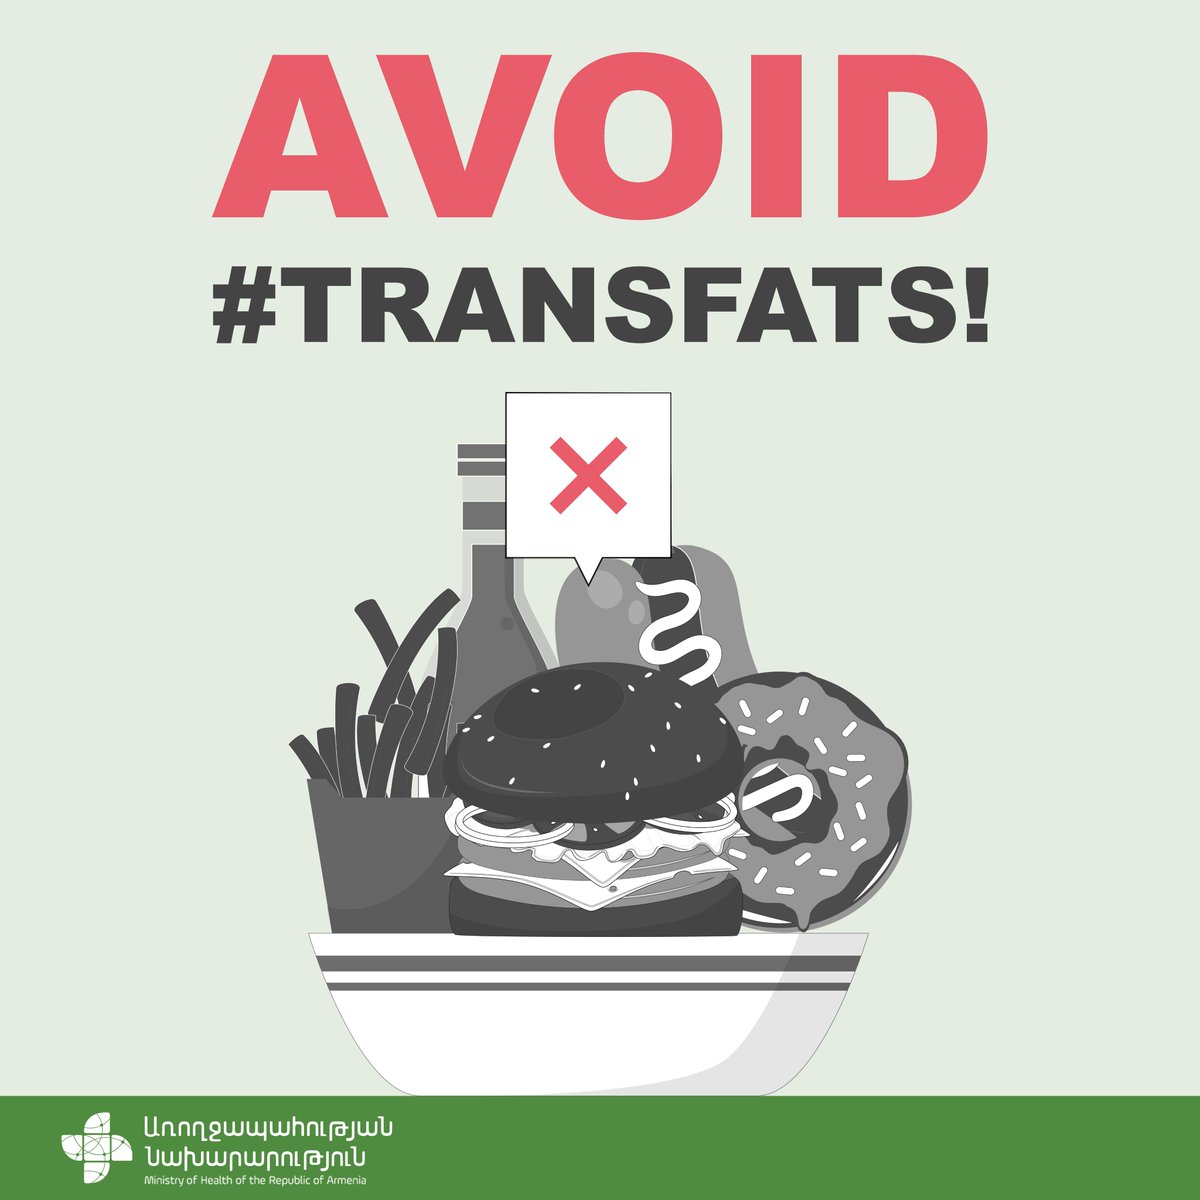 ⚠️Trans fats have no known health benefits and are a major contributor to CVD worldwide, estimated to cause around 540,000 deaths every year. Limit your trans fats intake to less than 1% of total energy intake.